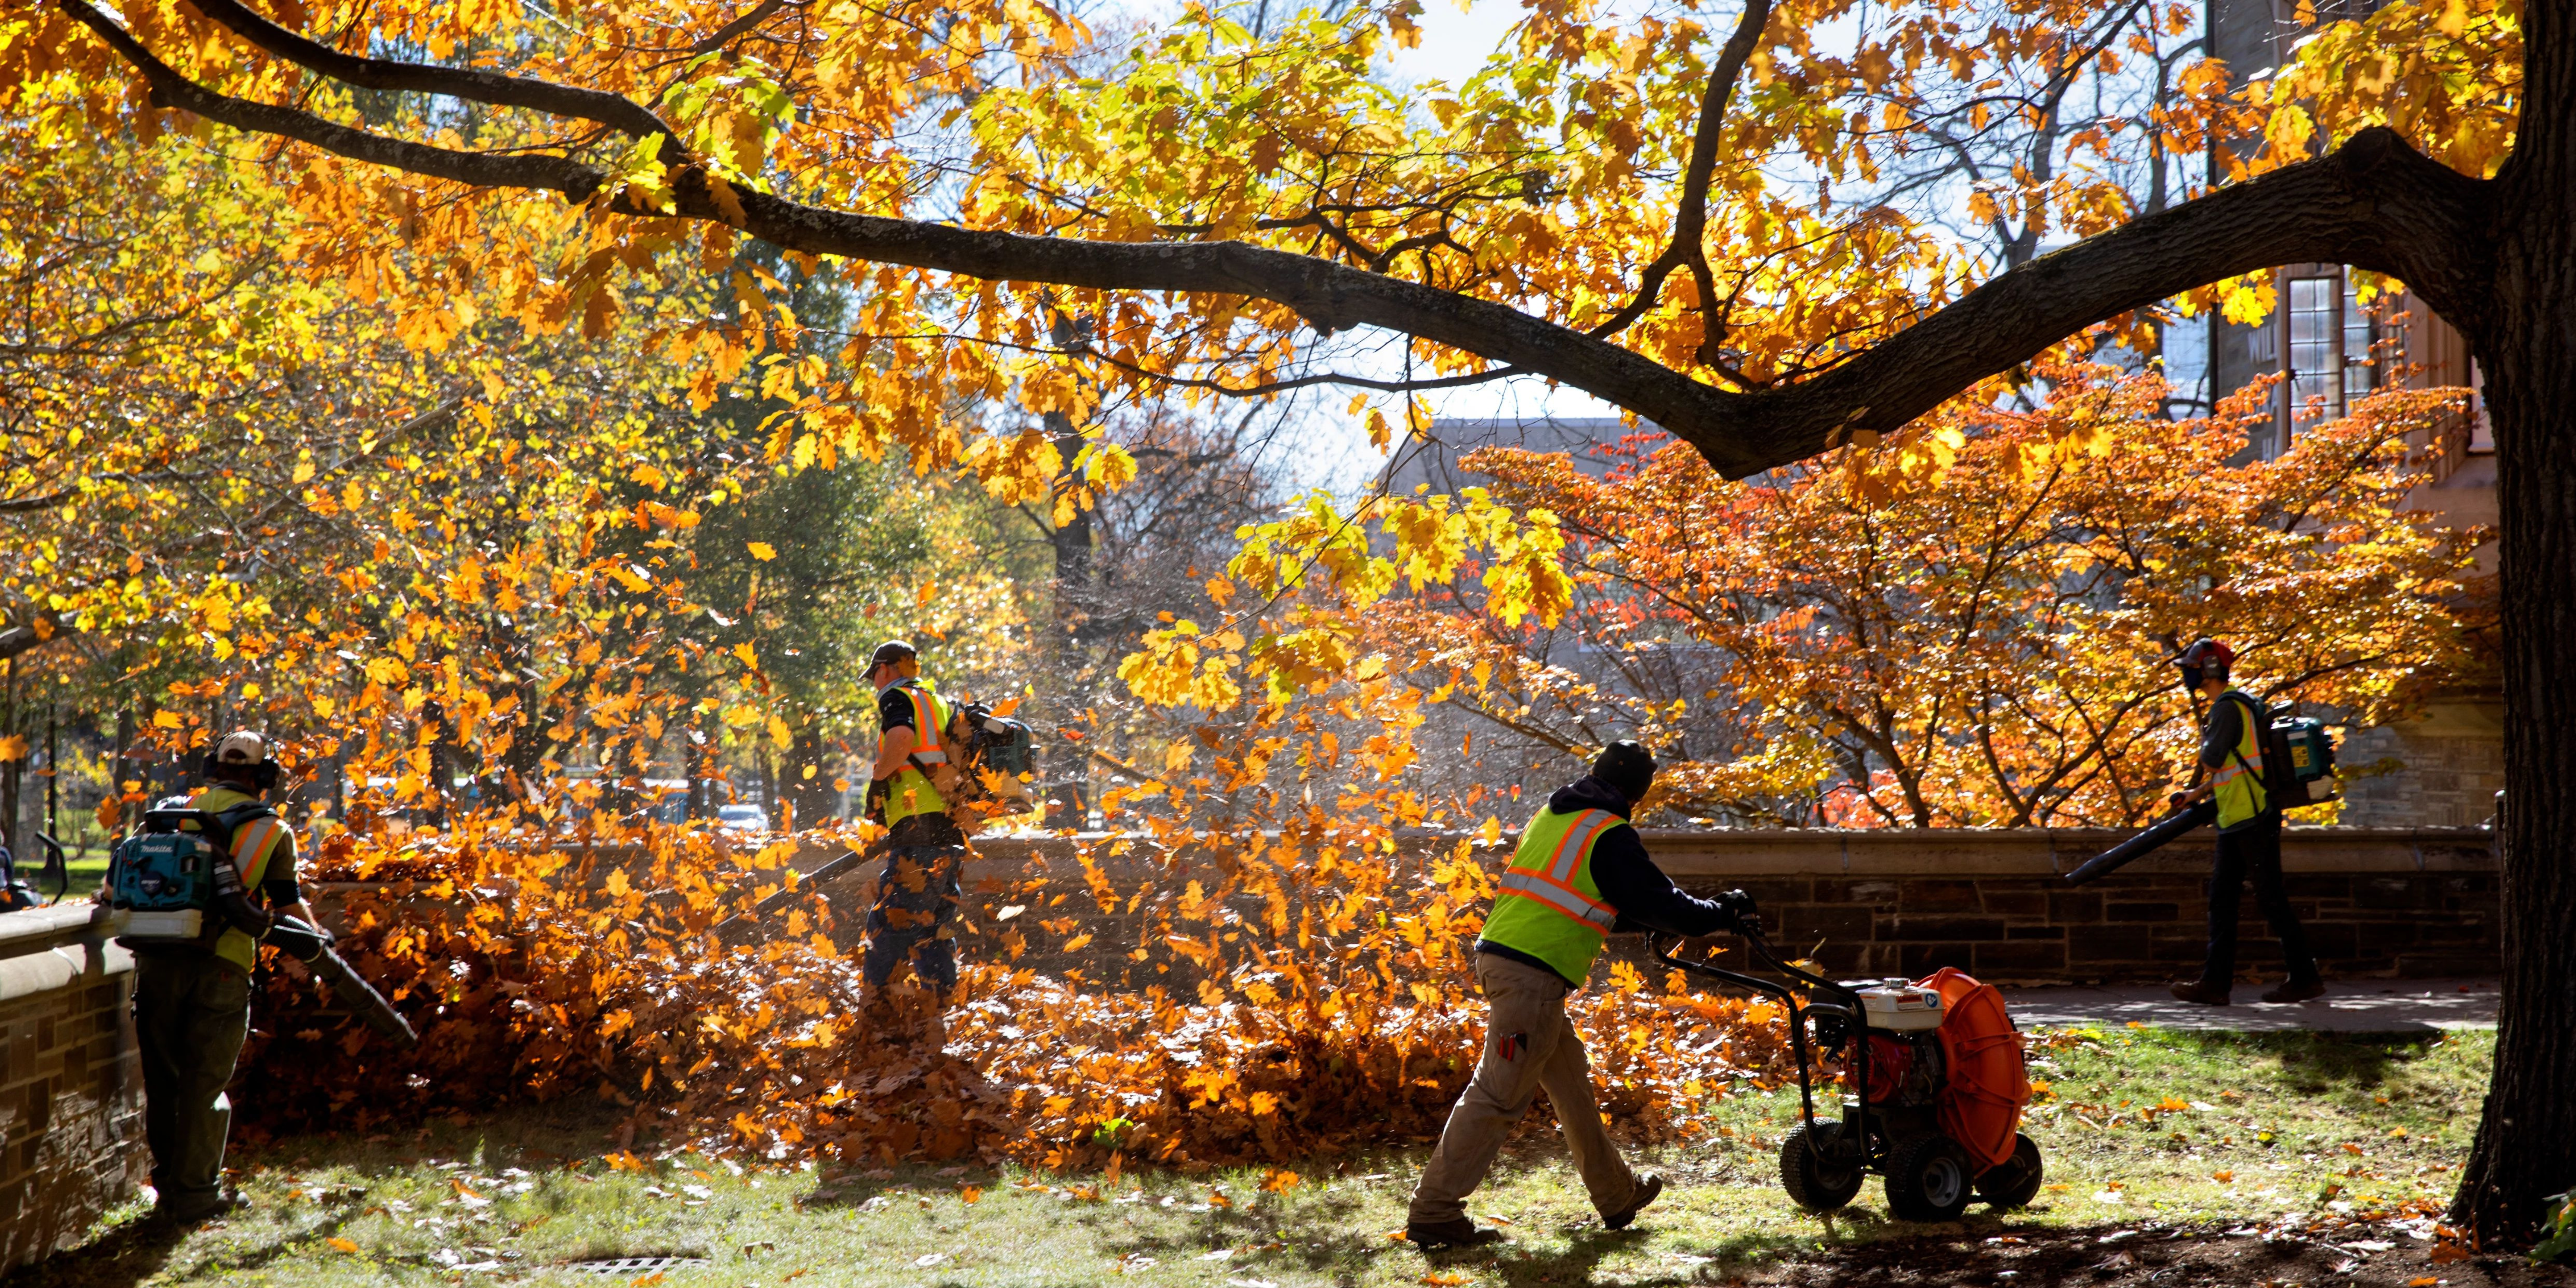 Grounds staff work at full speed to keep up with the falling leaves outside Willard Straight Hall.